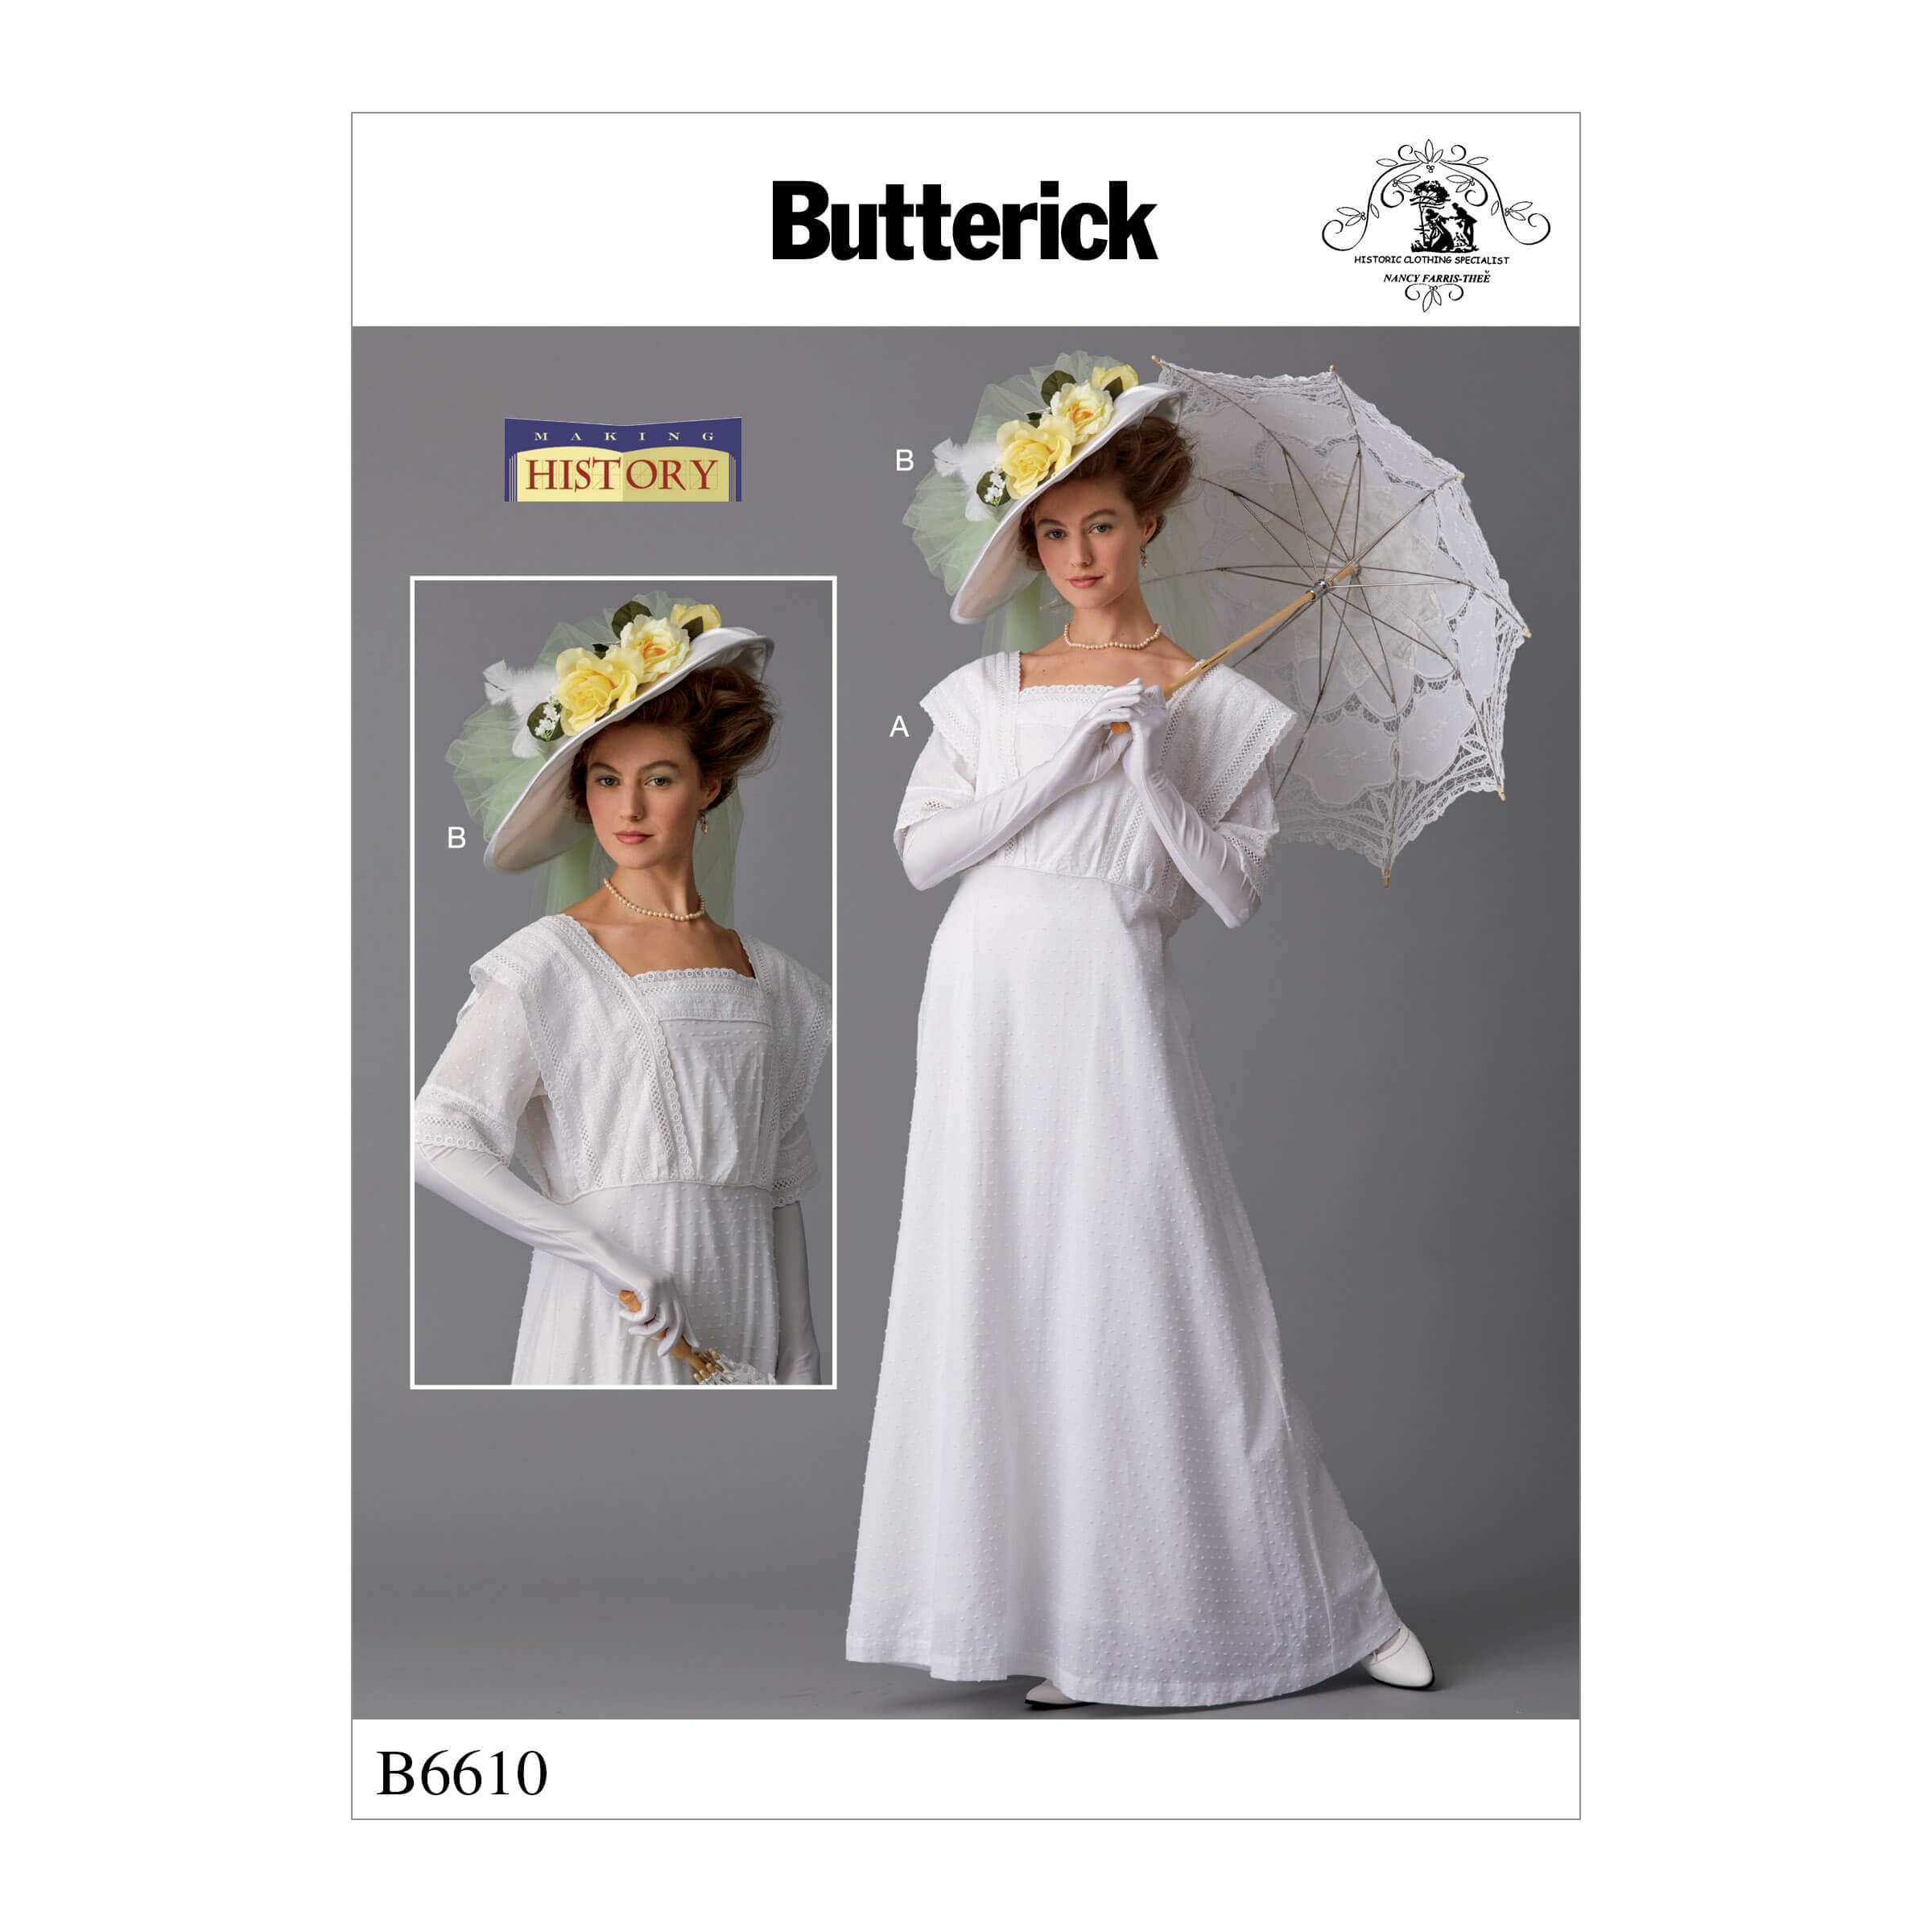 Butterick Sewing Pattern B6610 Misses' Costume and Hat